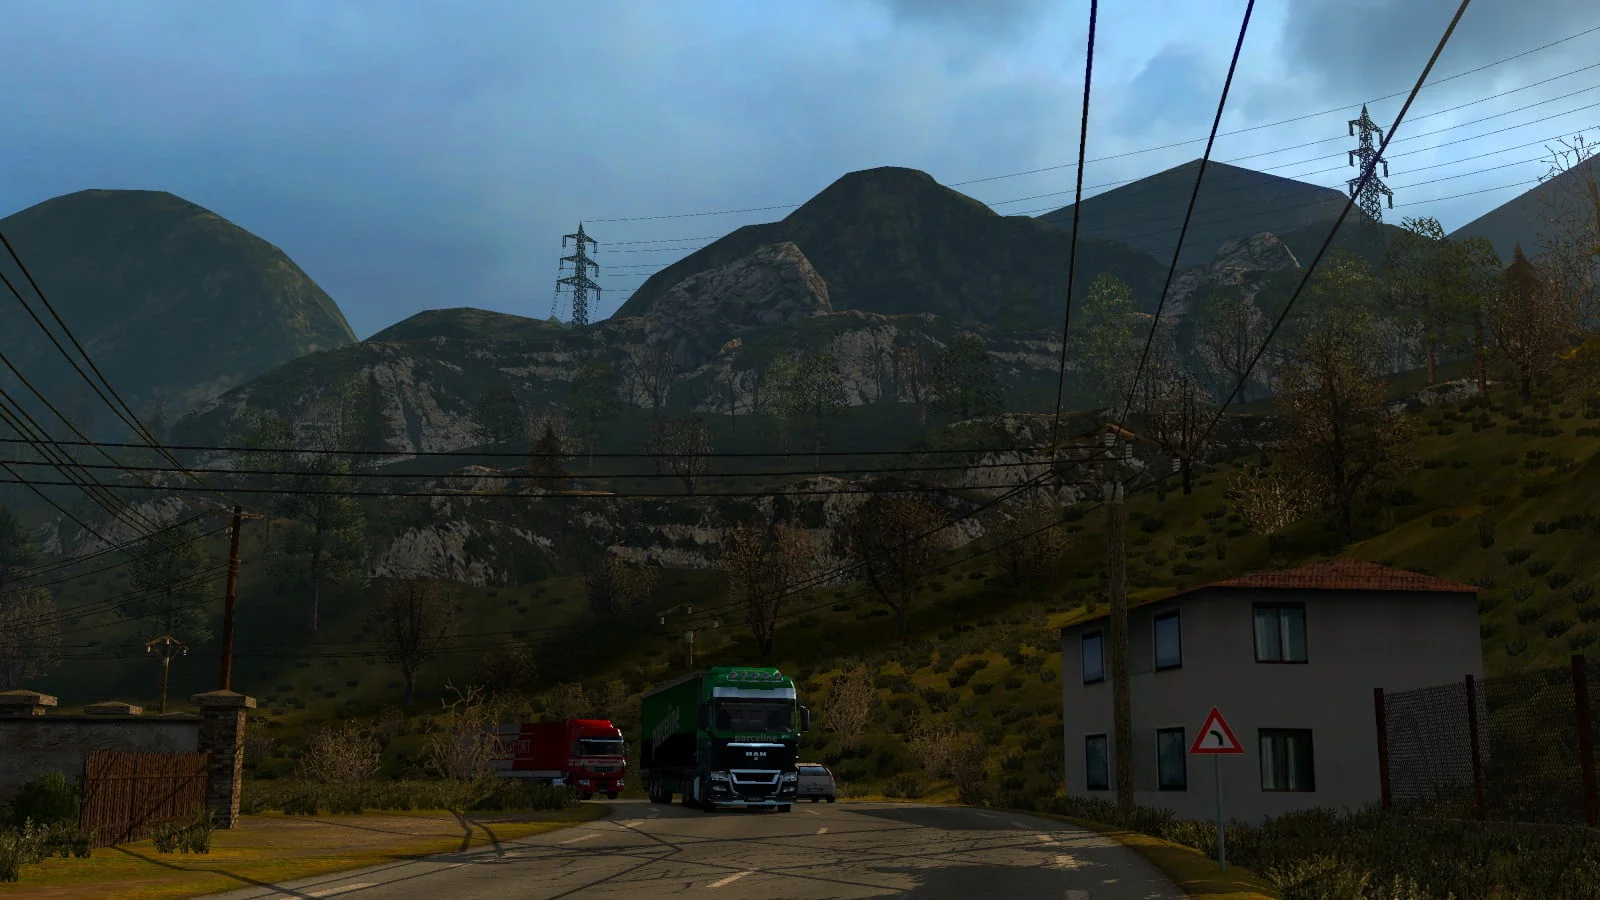 21 Ways To Never Get Bored of Euro Truck Simulator 2